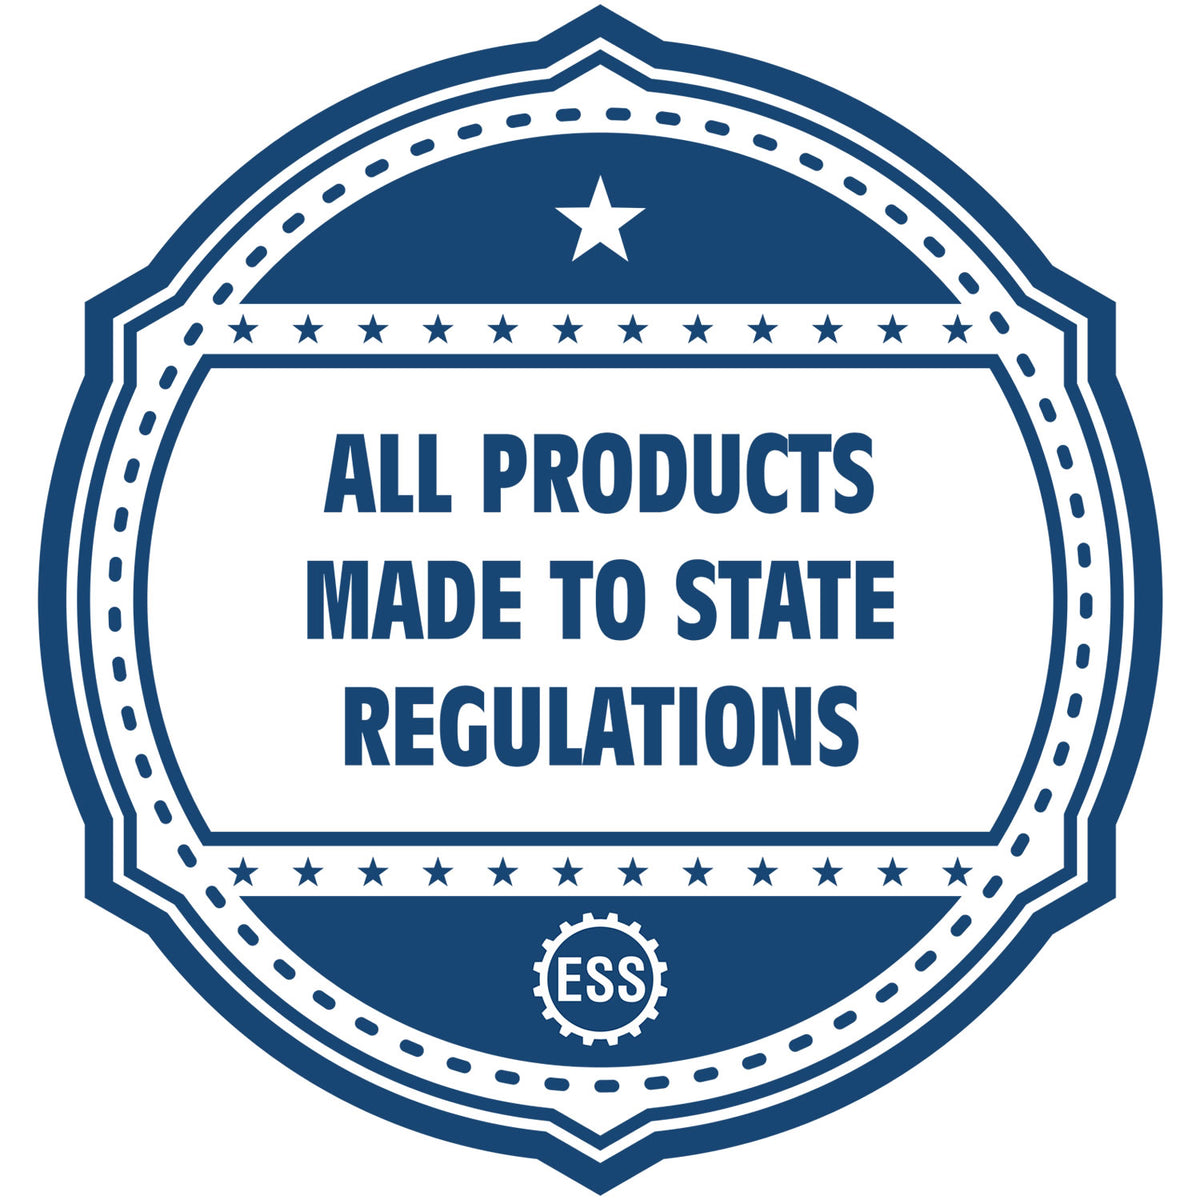 An icon or badge element for the Heavy Duty Cast Iron South Carolina Engineer Seal Embosser showing that this product is made in compliance with state regulations.